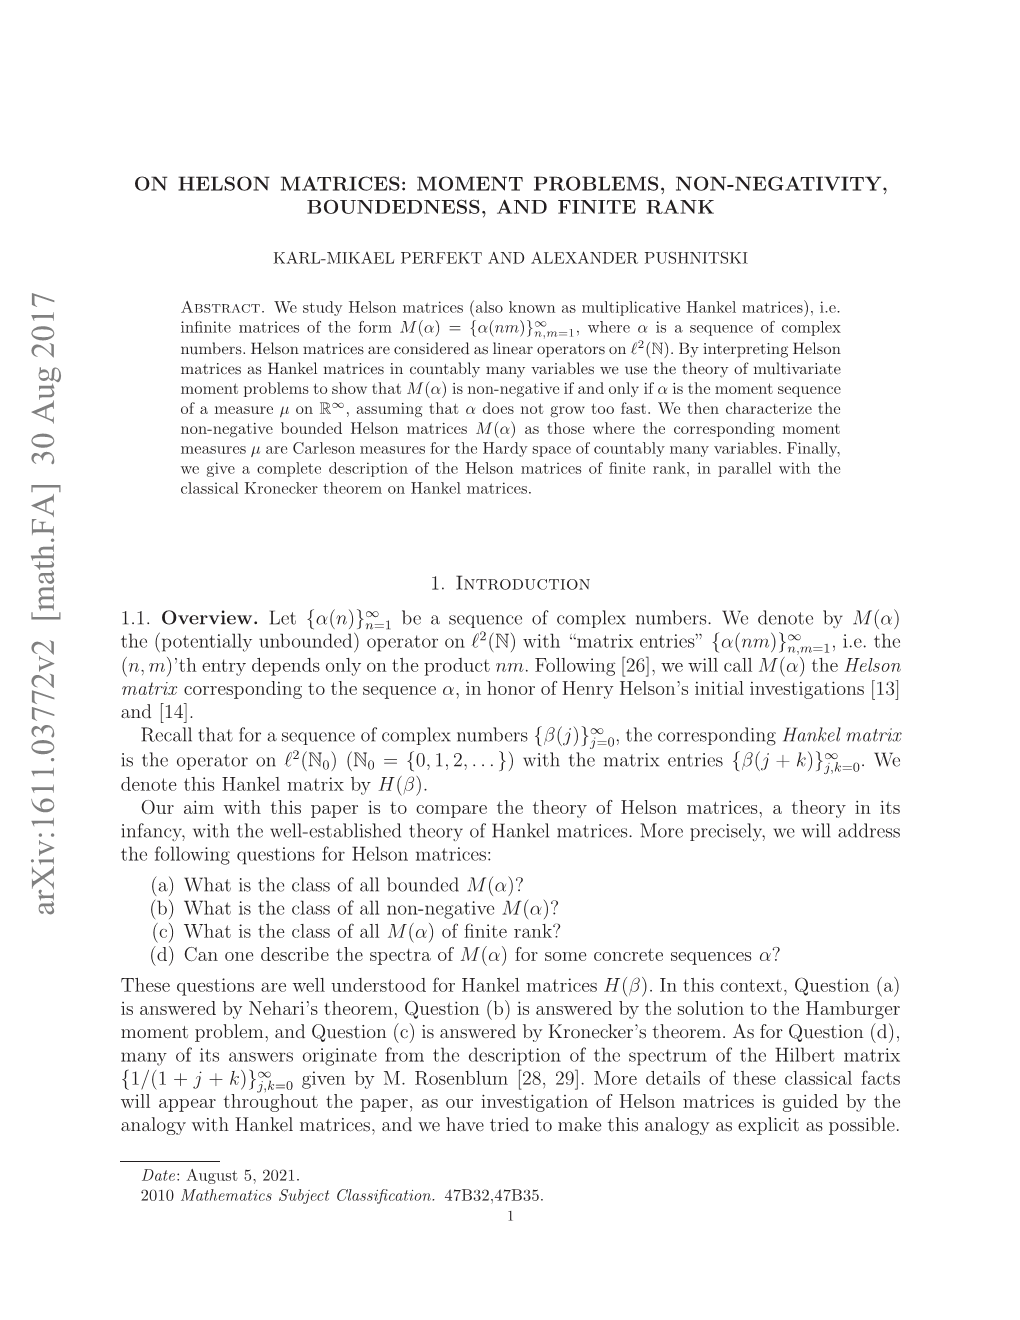 On Helson Matrices: Moment Problems, Non-Negativity